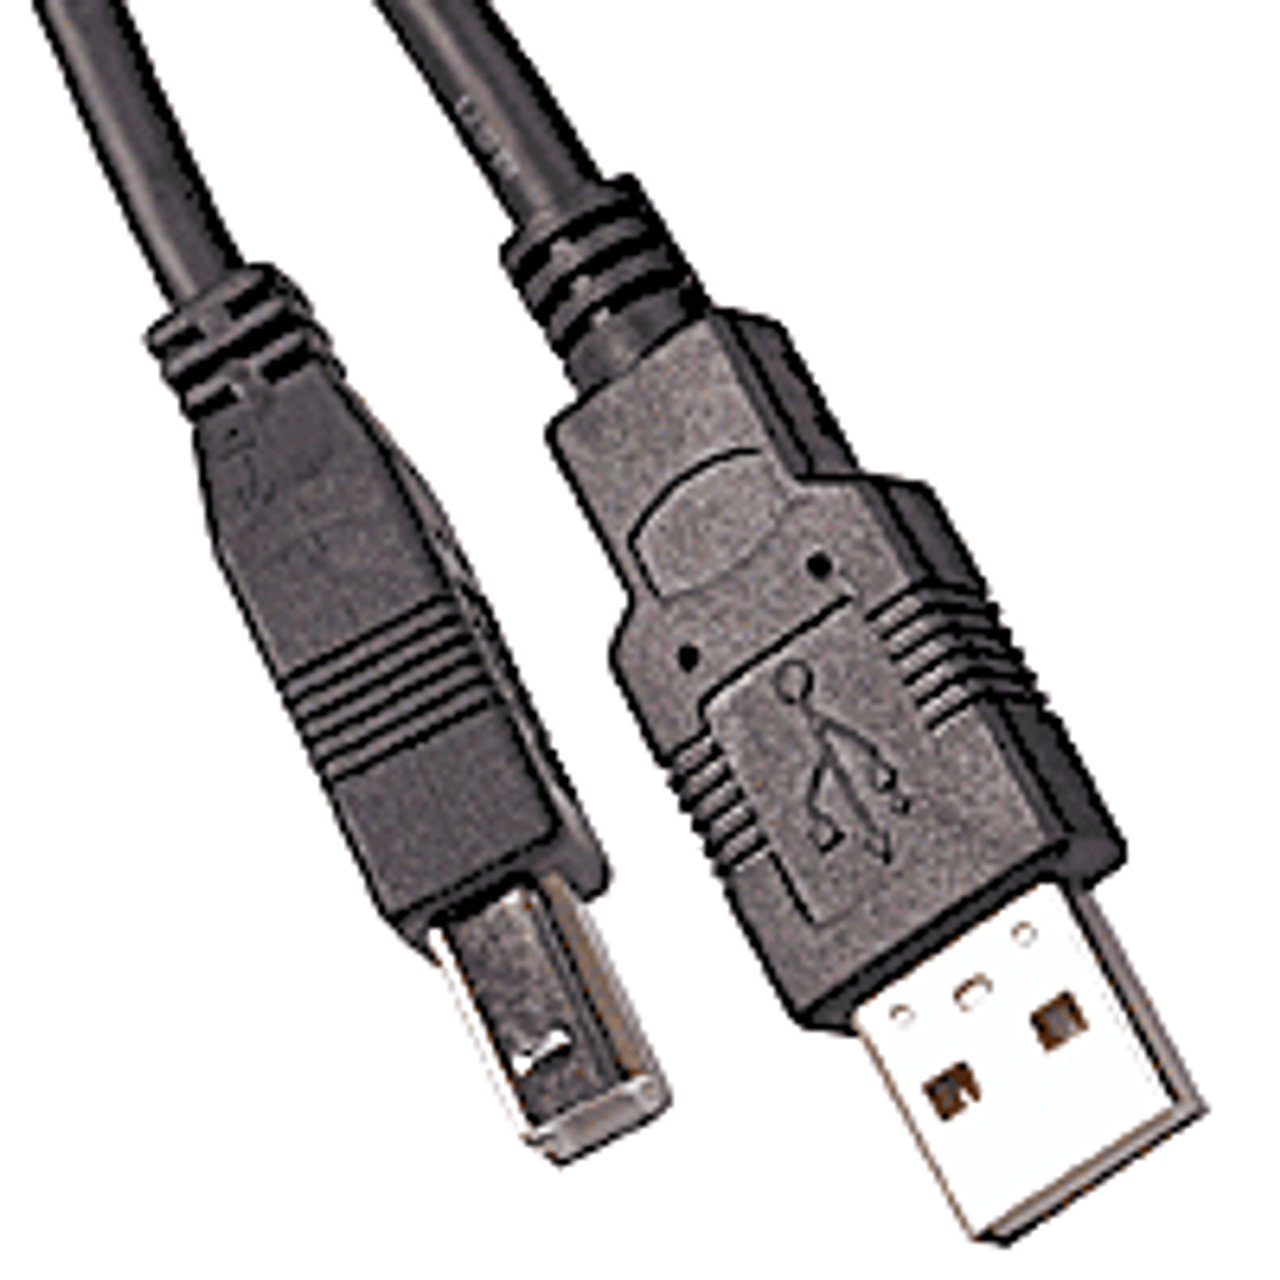 6 Foot USB 2.0 Type A Male to Type B Male Cable - Black